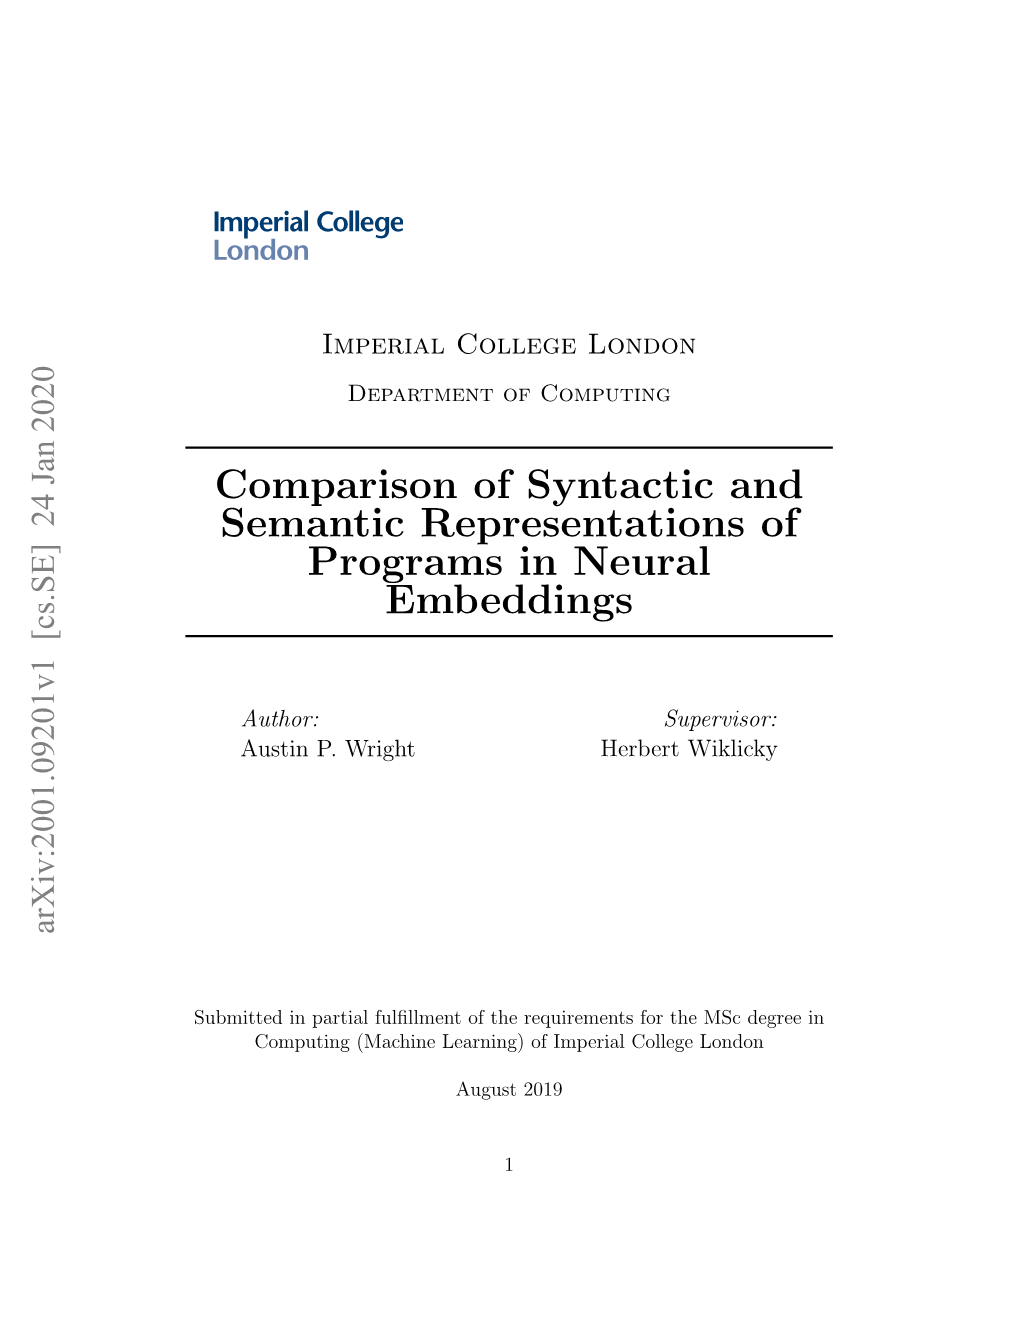 Comparison of Syntactic and Semantic Representations of Programs in Neural Embeddings